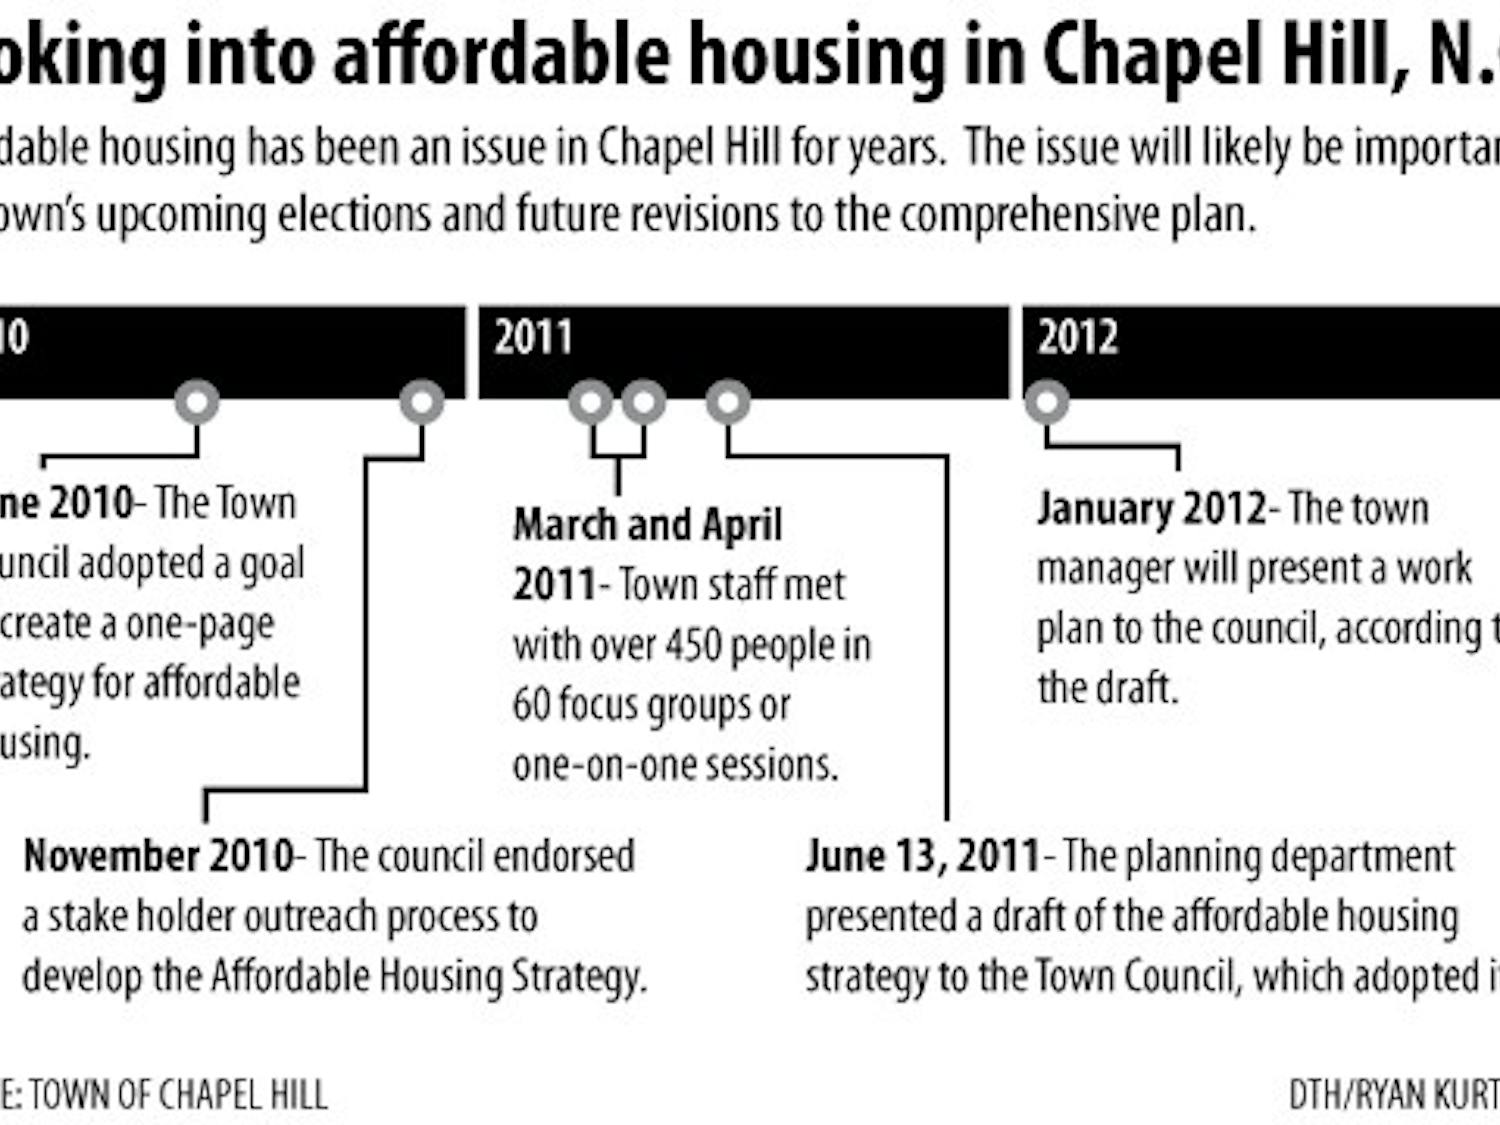 Graphic: Affordable housing a major issue in 2011 Chapel Hill elections (Ryan Kurtzman)